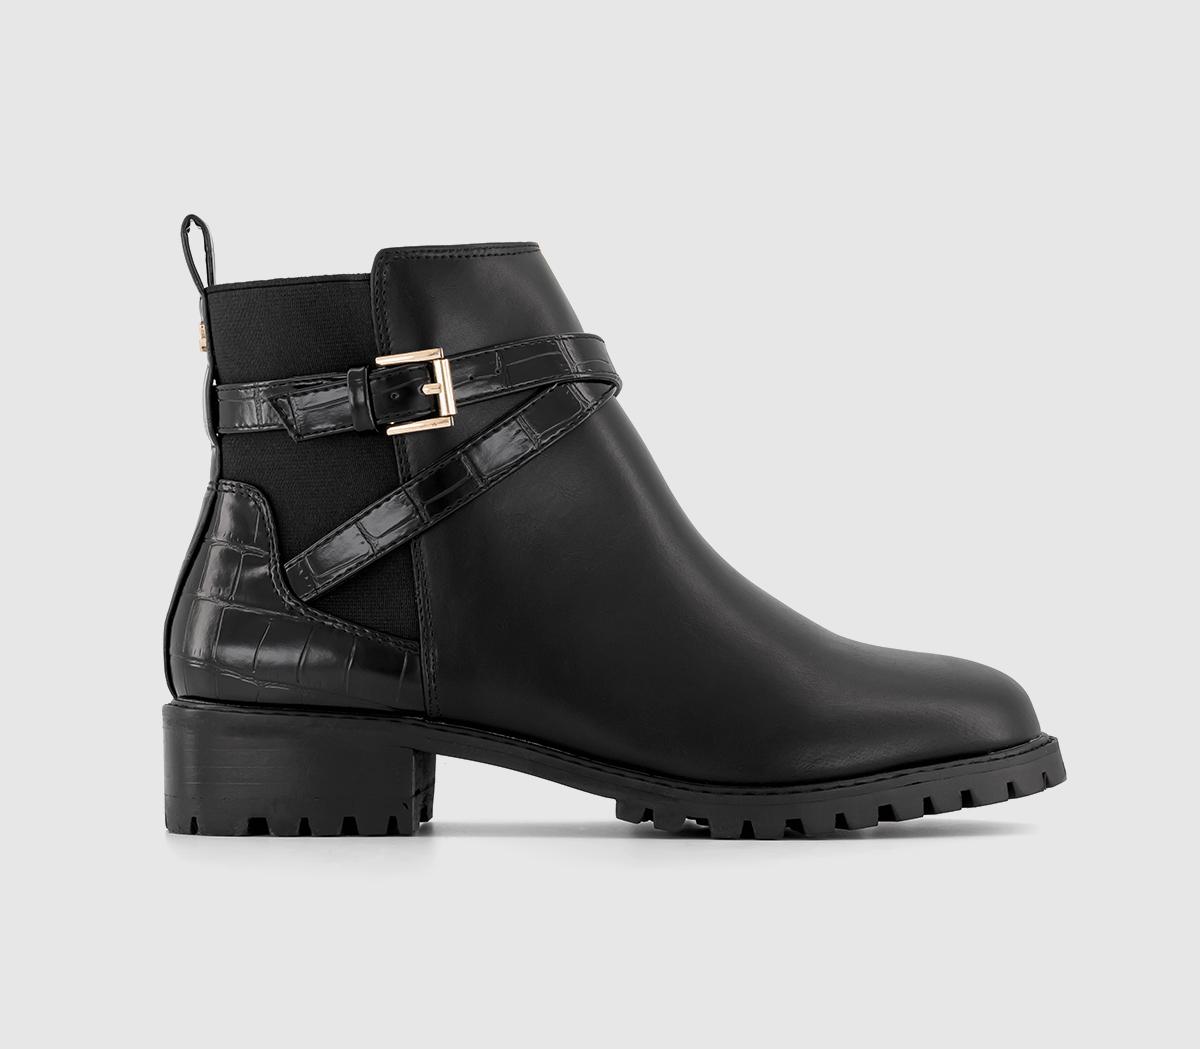 Aaliyah Buckle Strap Cleated Boots Black